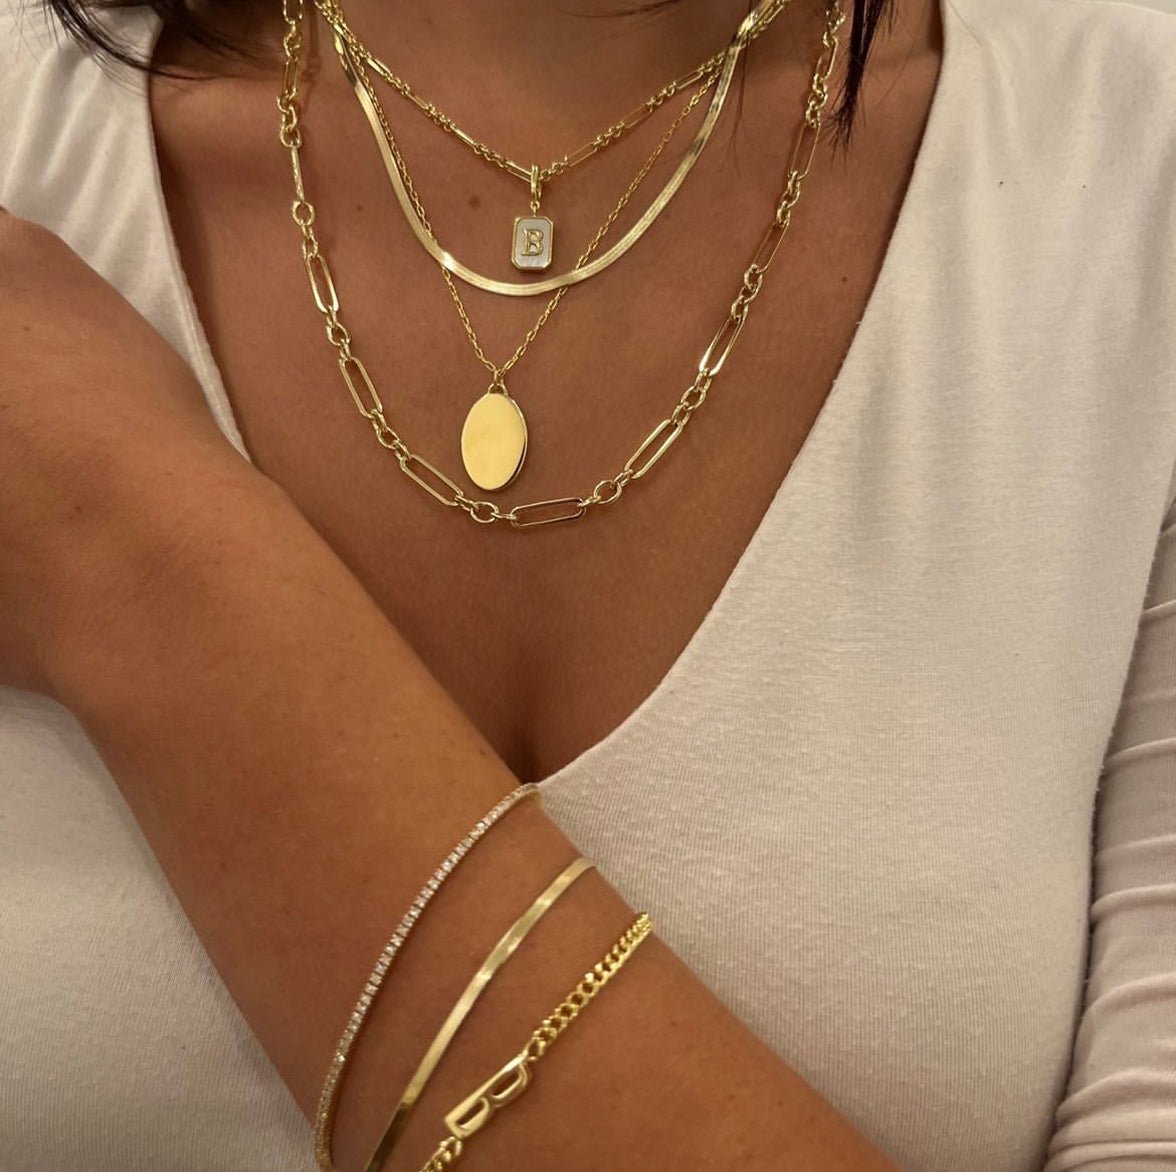 Woman wearing gold plated necklaces and bracelets with a diamond tennis bracelet